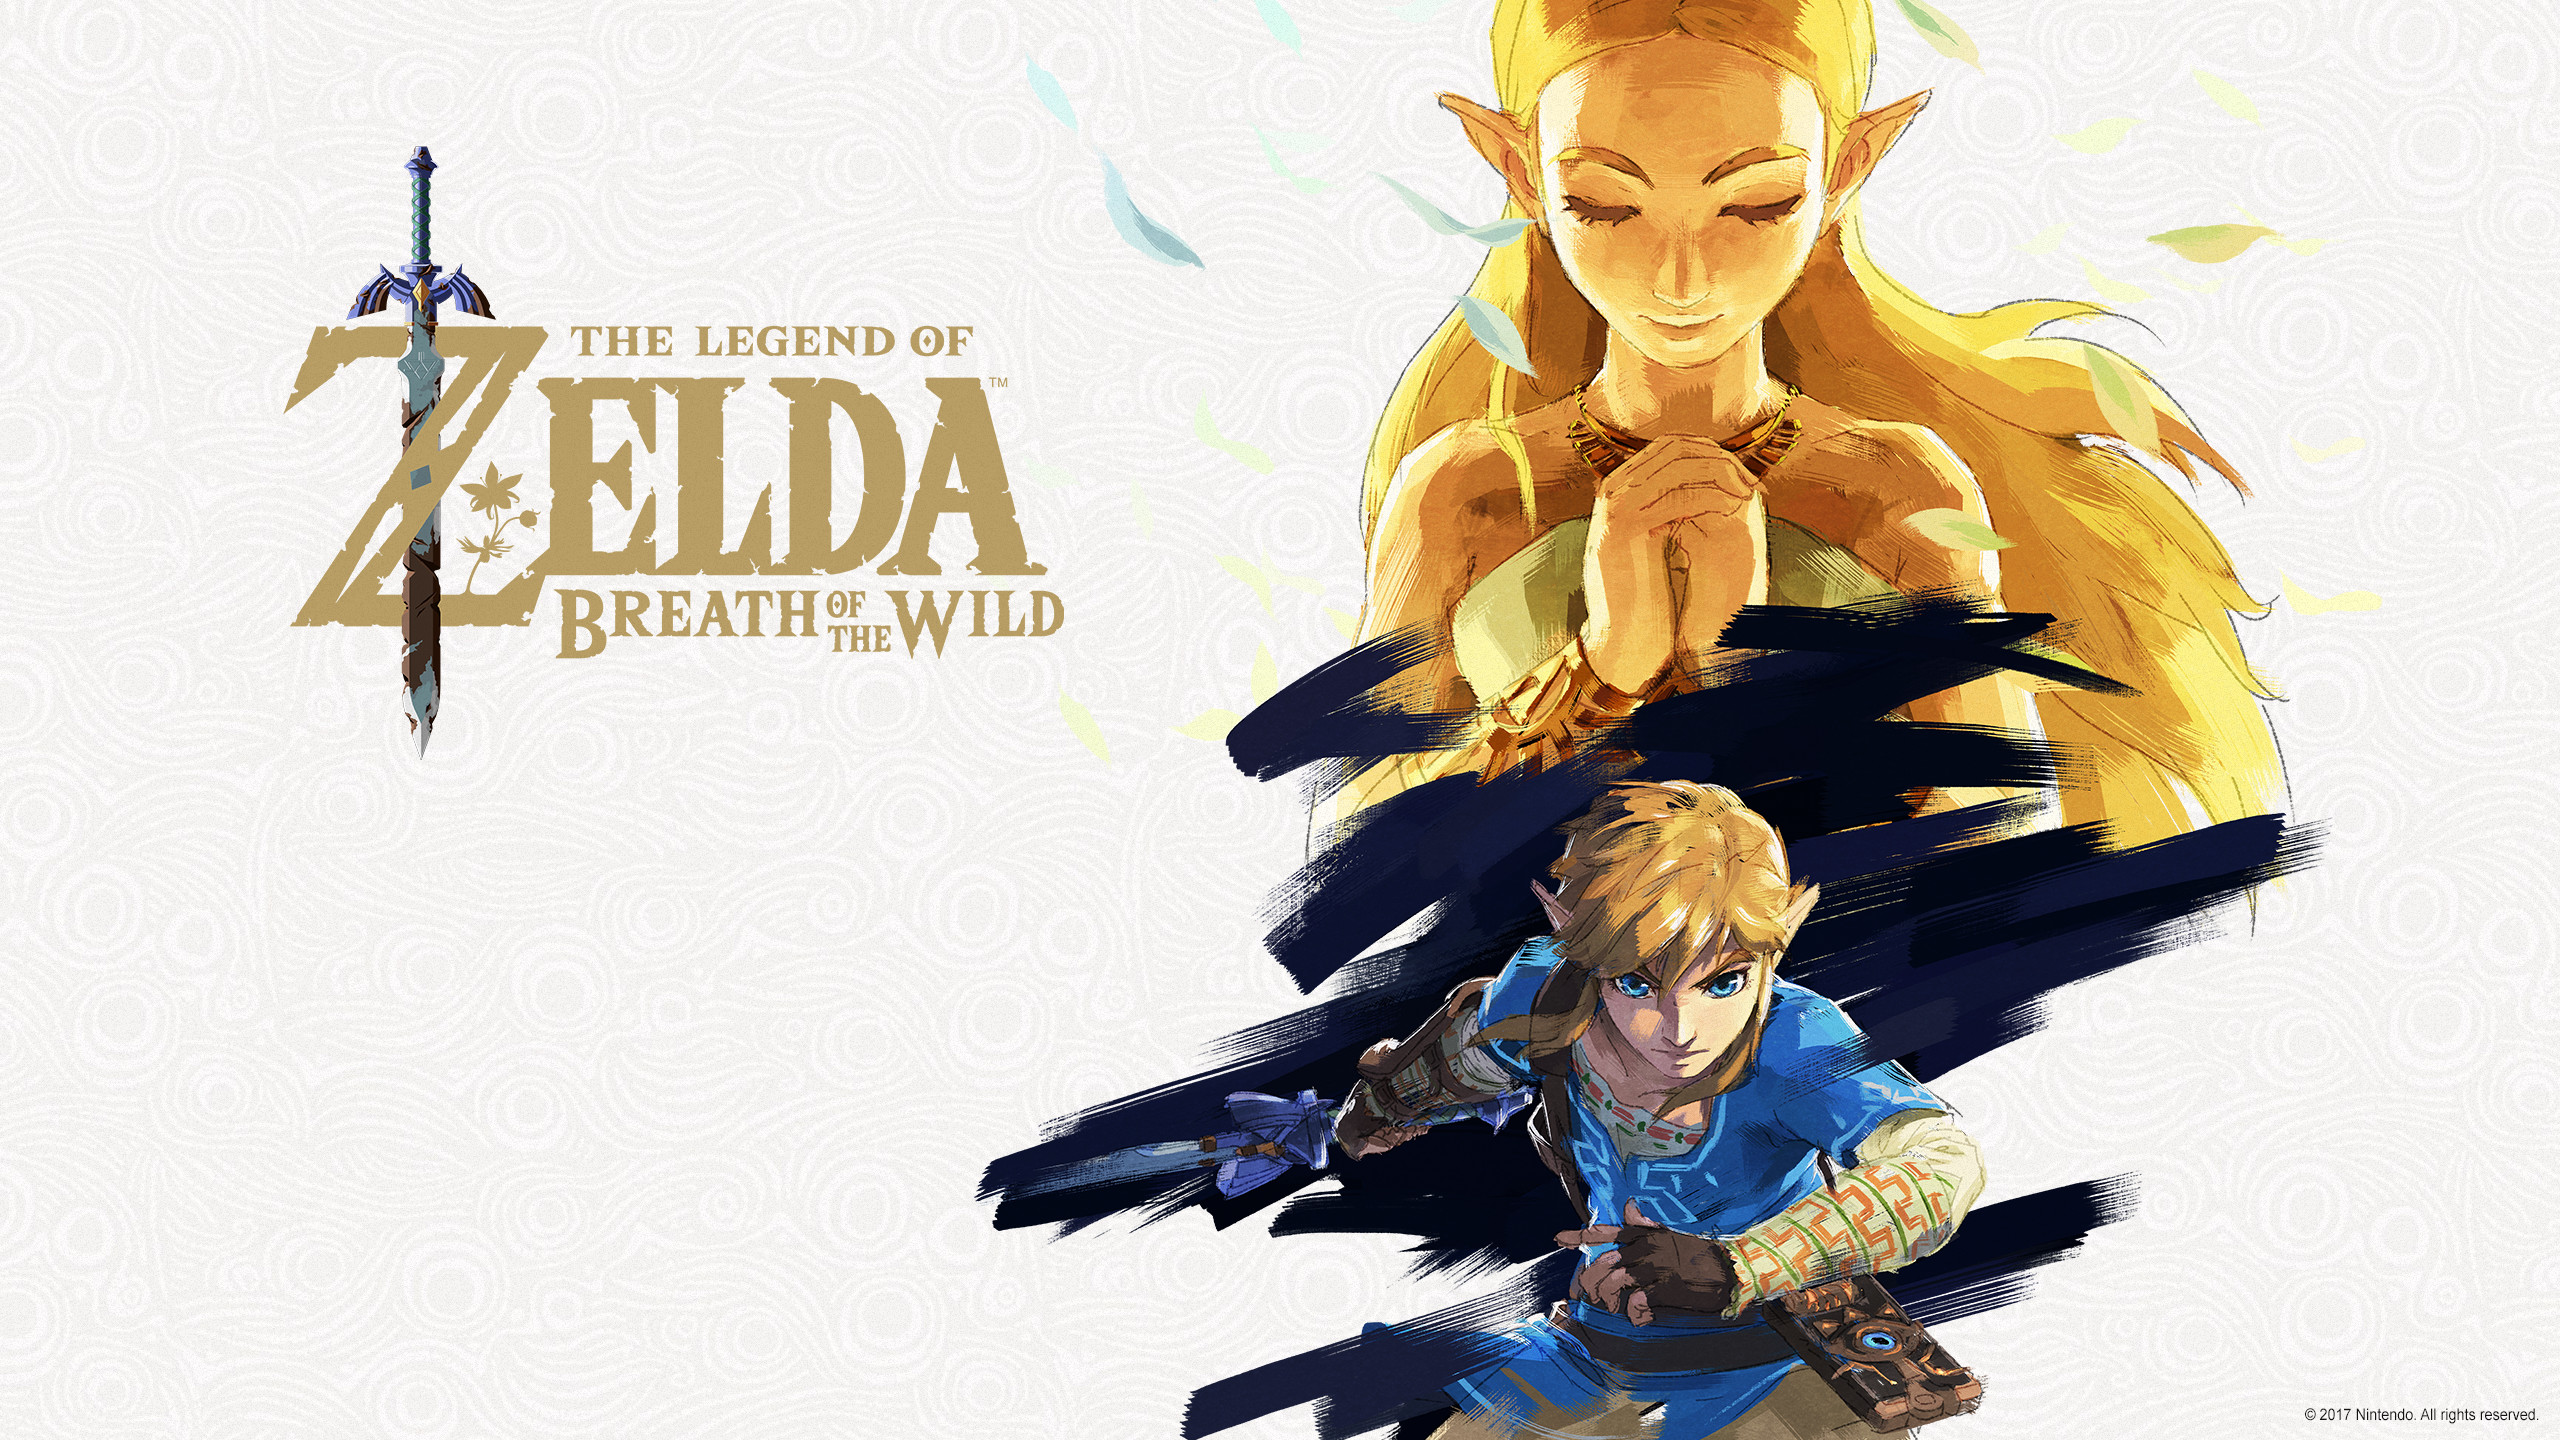 The Legend of Zelda™: Breath of the Wild for the Nintendo Switch™ home gaming system and Wii U™ console